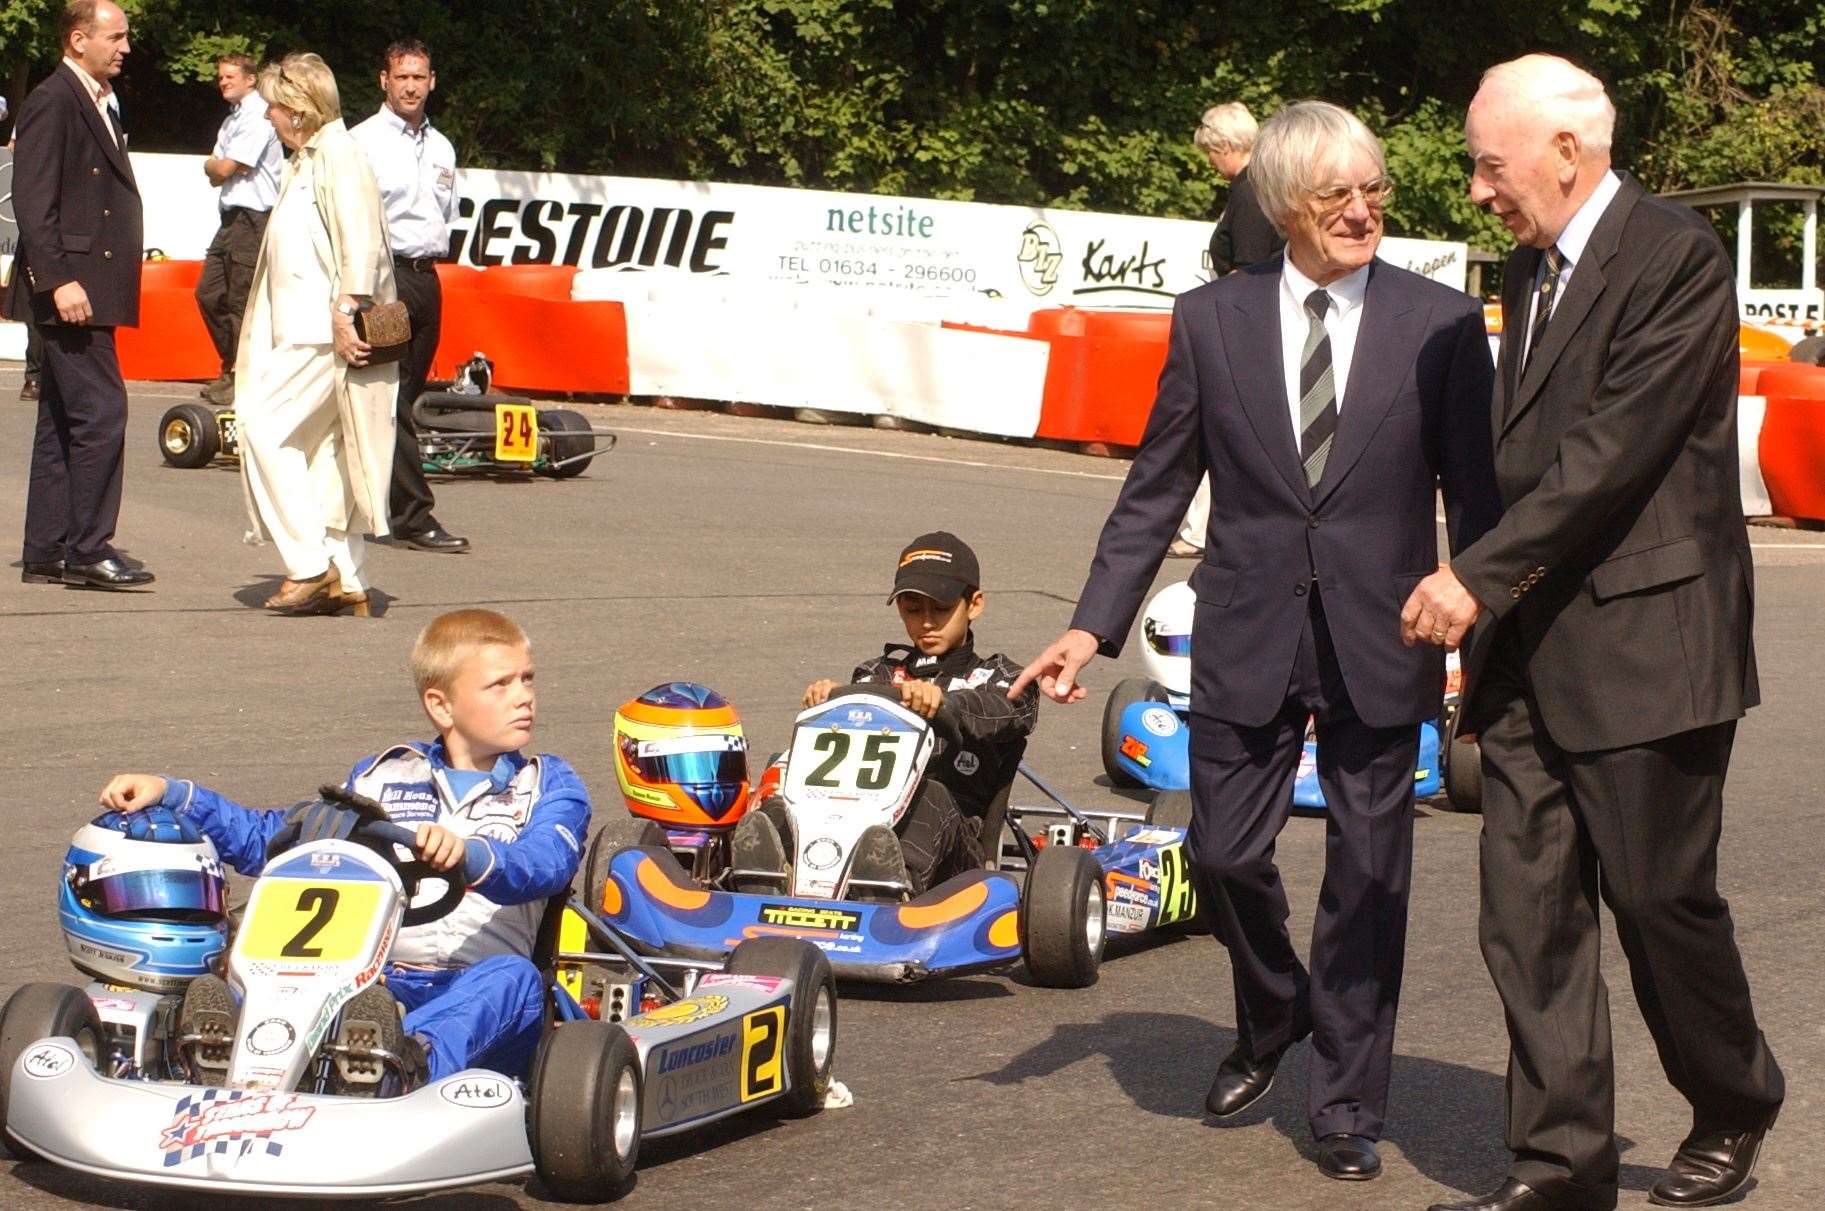 When then-F1 supremo Bernie Ecclestone unveiled Buckmore's new clubhouse in 2003, he said karting could become part of F1 events, with races taking part on Thursday and Friday before a Grand Prix. "I am pushing F1 circuits to build circuits which we could include in F1 weekends," he said. "With the fanbase and television audience that F1 has, it would boost kart racing, which would in turn provide new talent." Picture: Jim Rantell